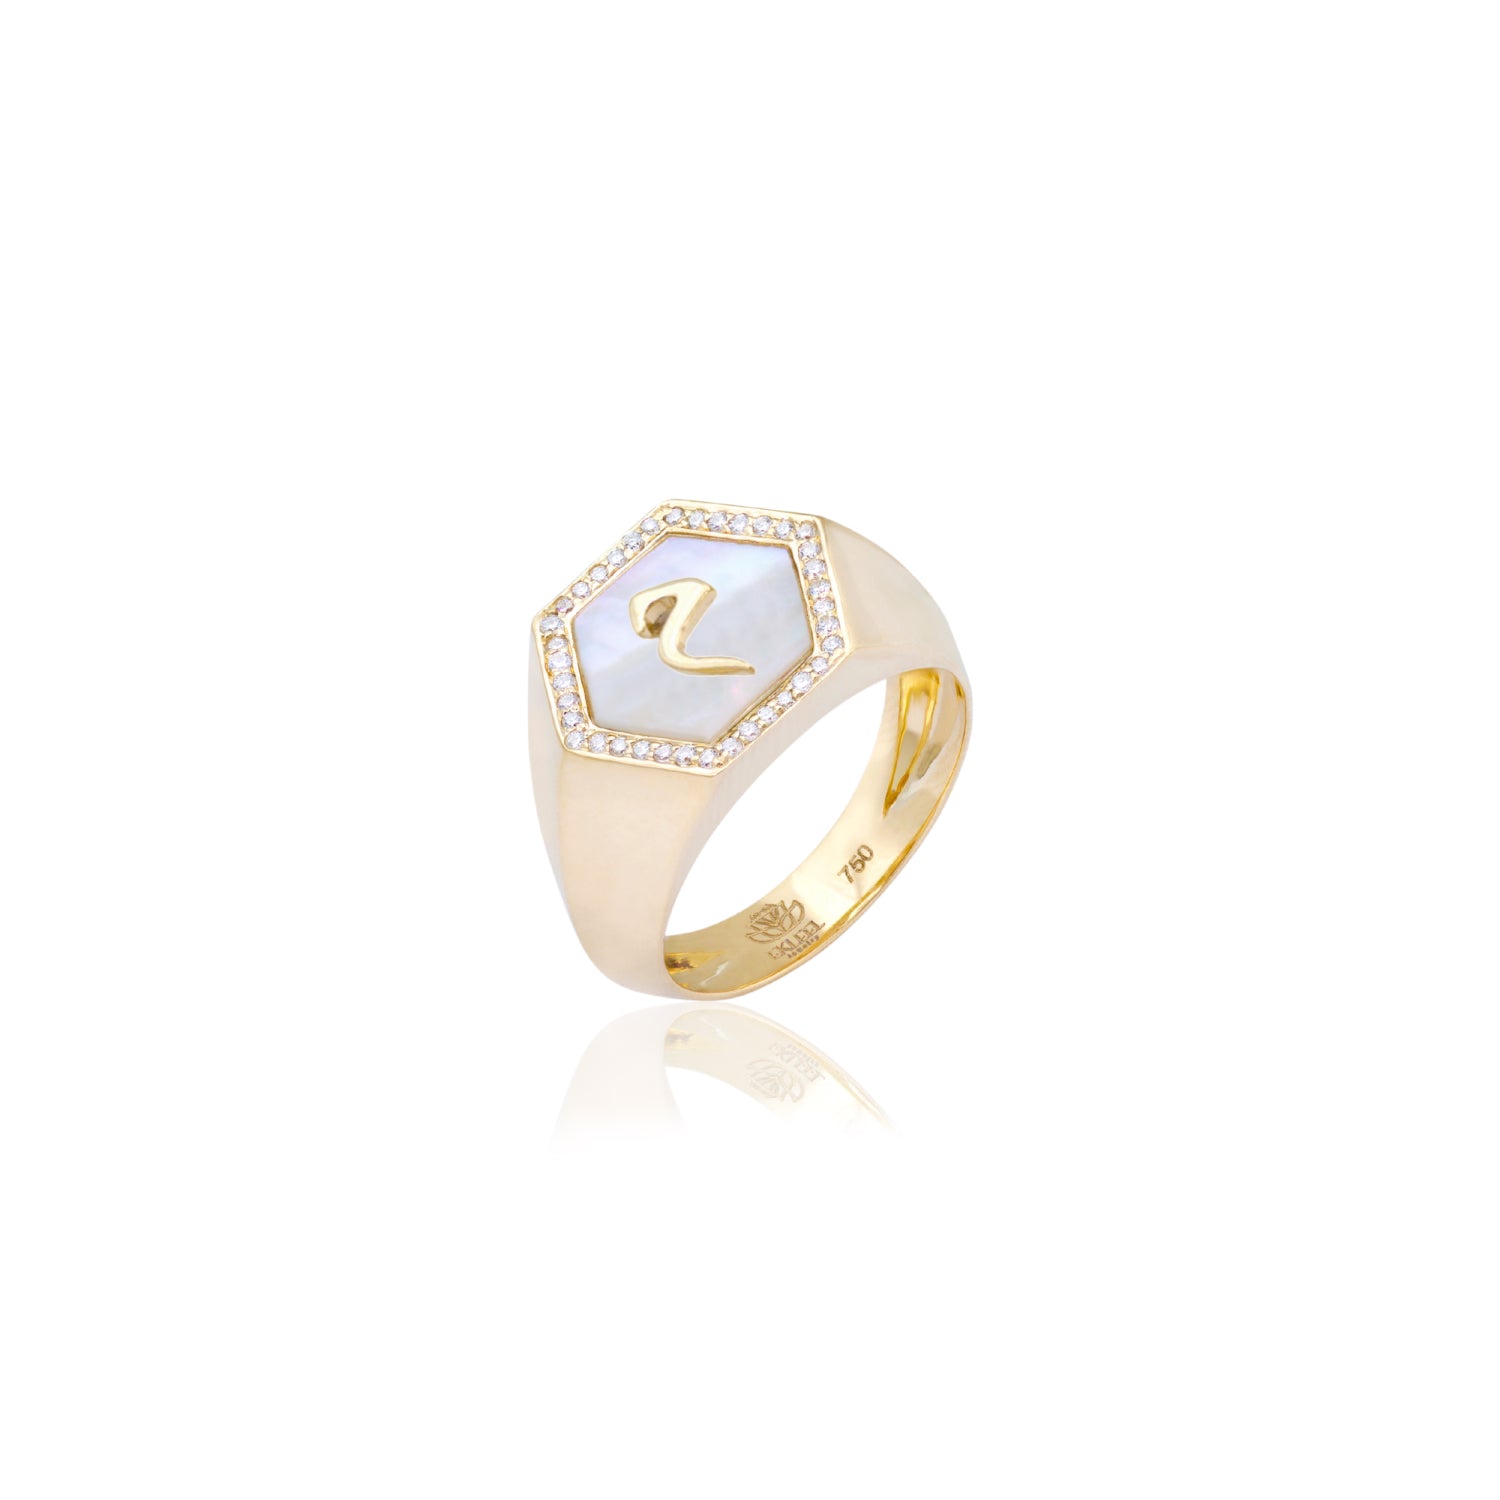 Qamoos 2.0 Letter م White Mother of Pearl and Diamond Signet Ring in Yellow Gold